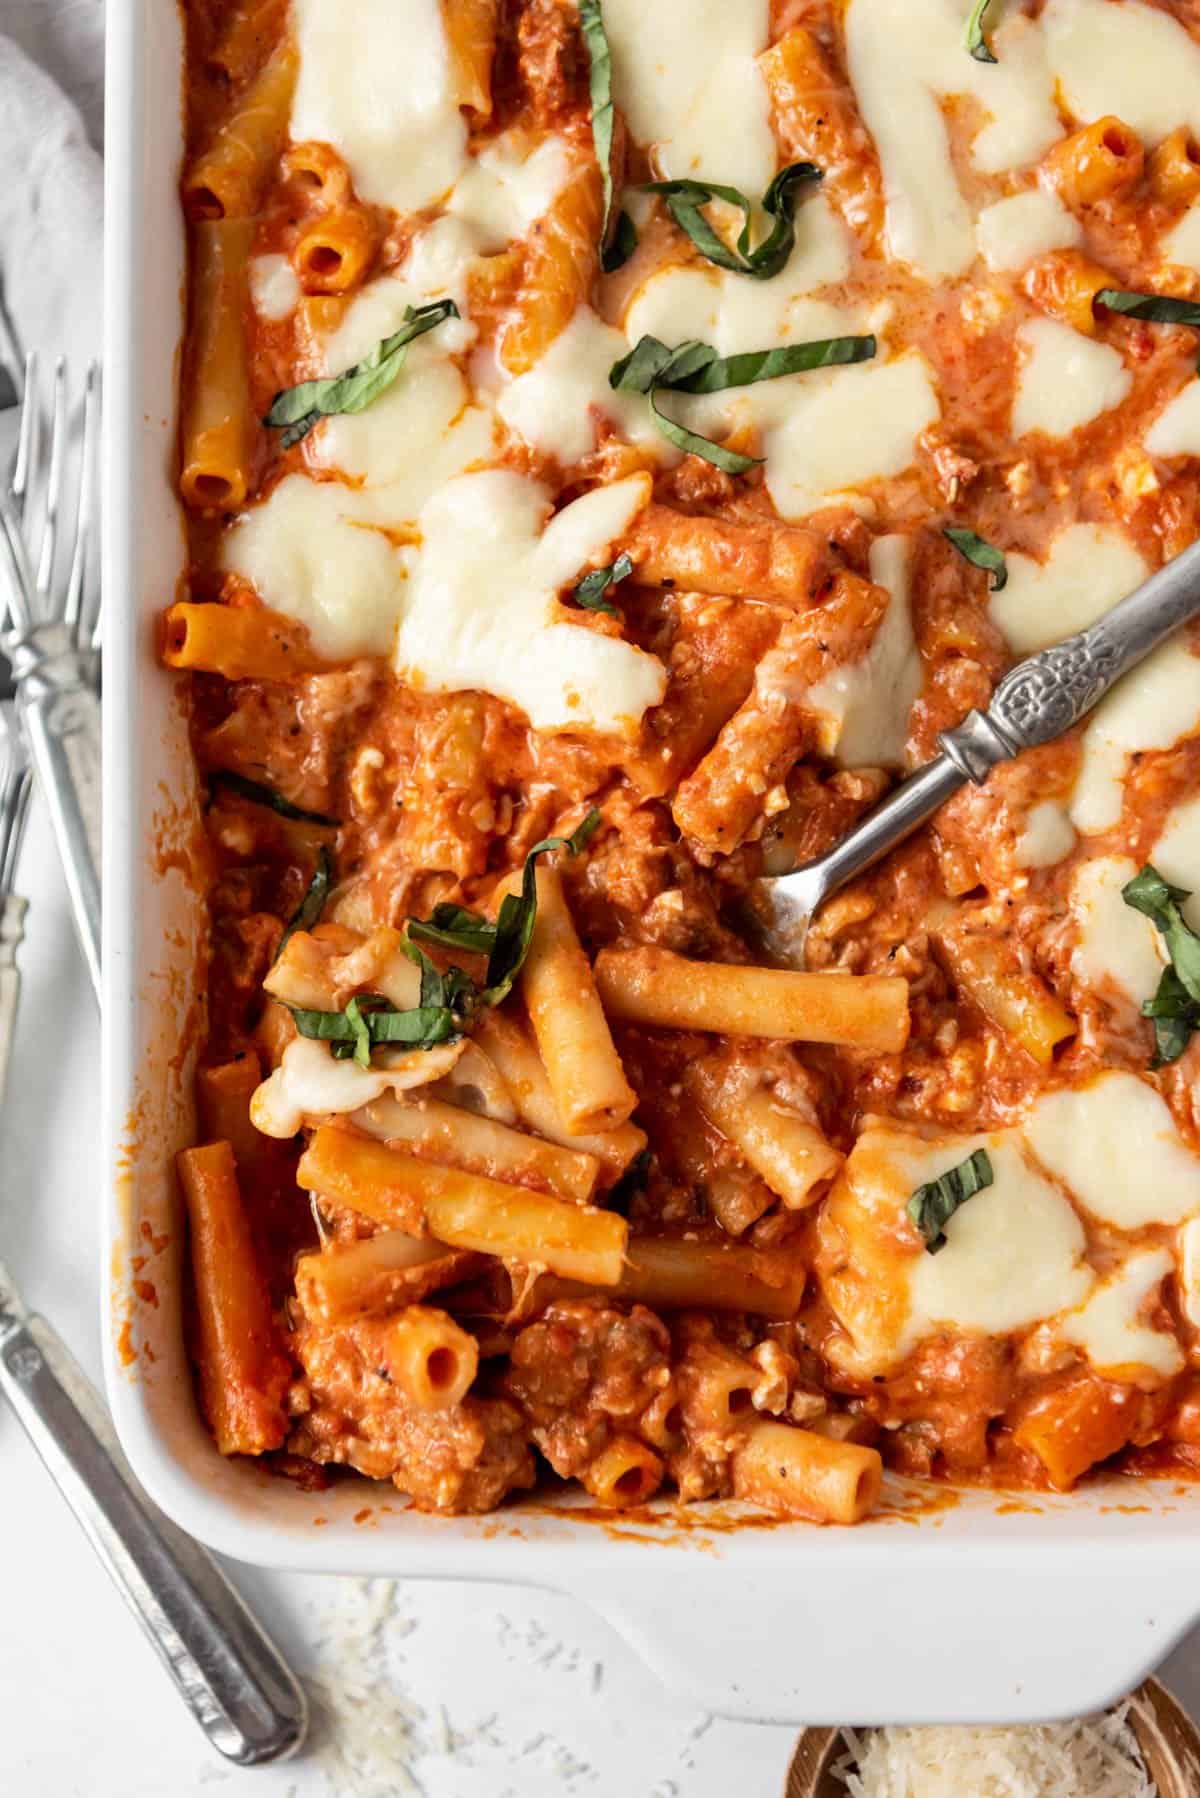 A serving spoon in a white casserole dish of baked ziti.